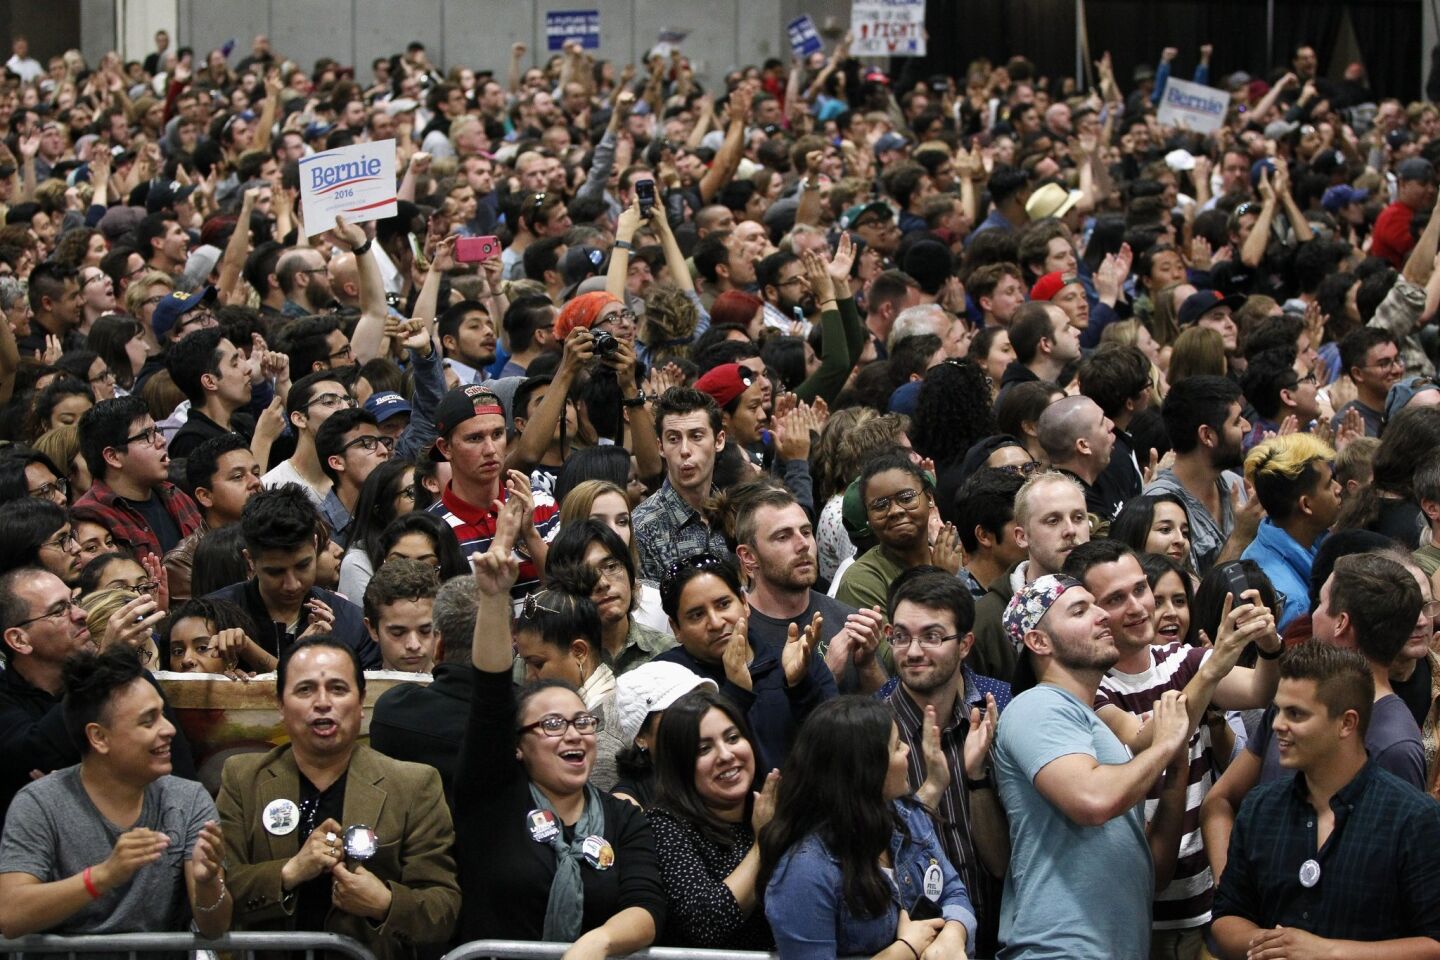 Supporters listen to Democratic presidential candidate Bernie Sanders.